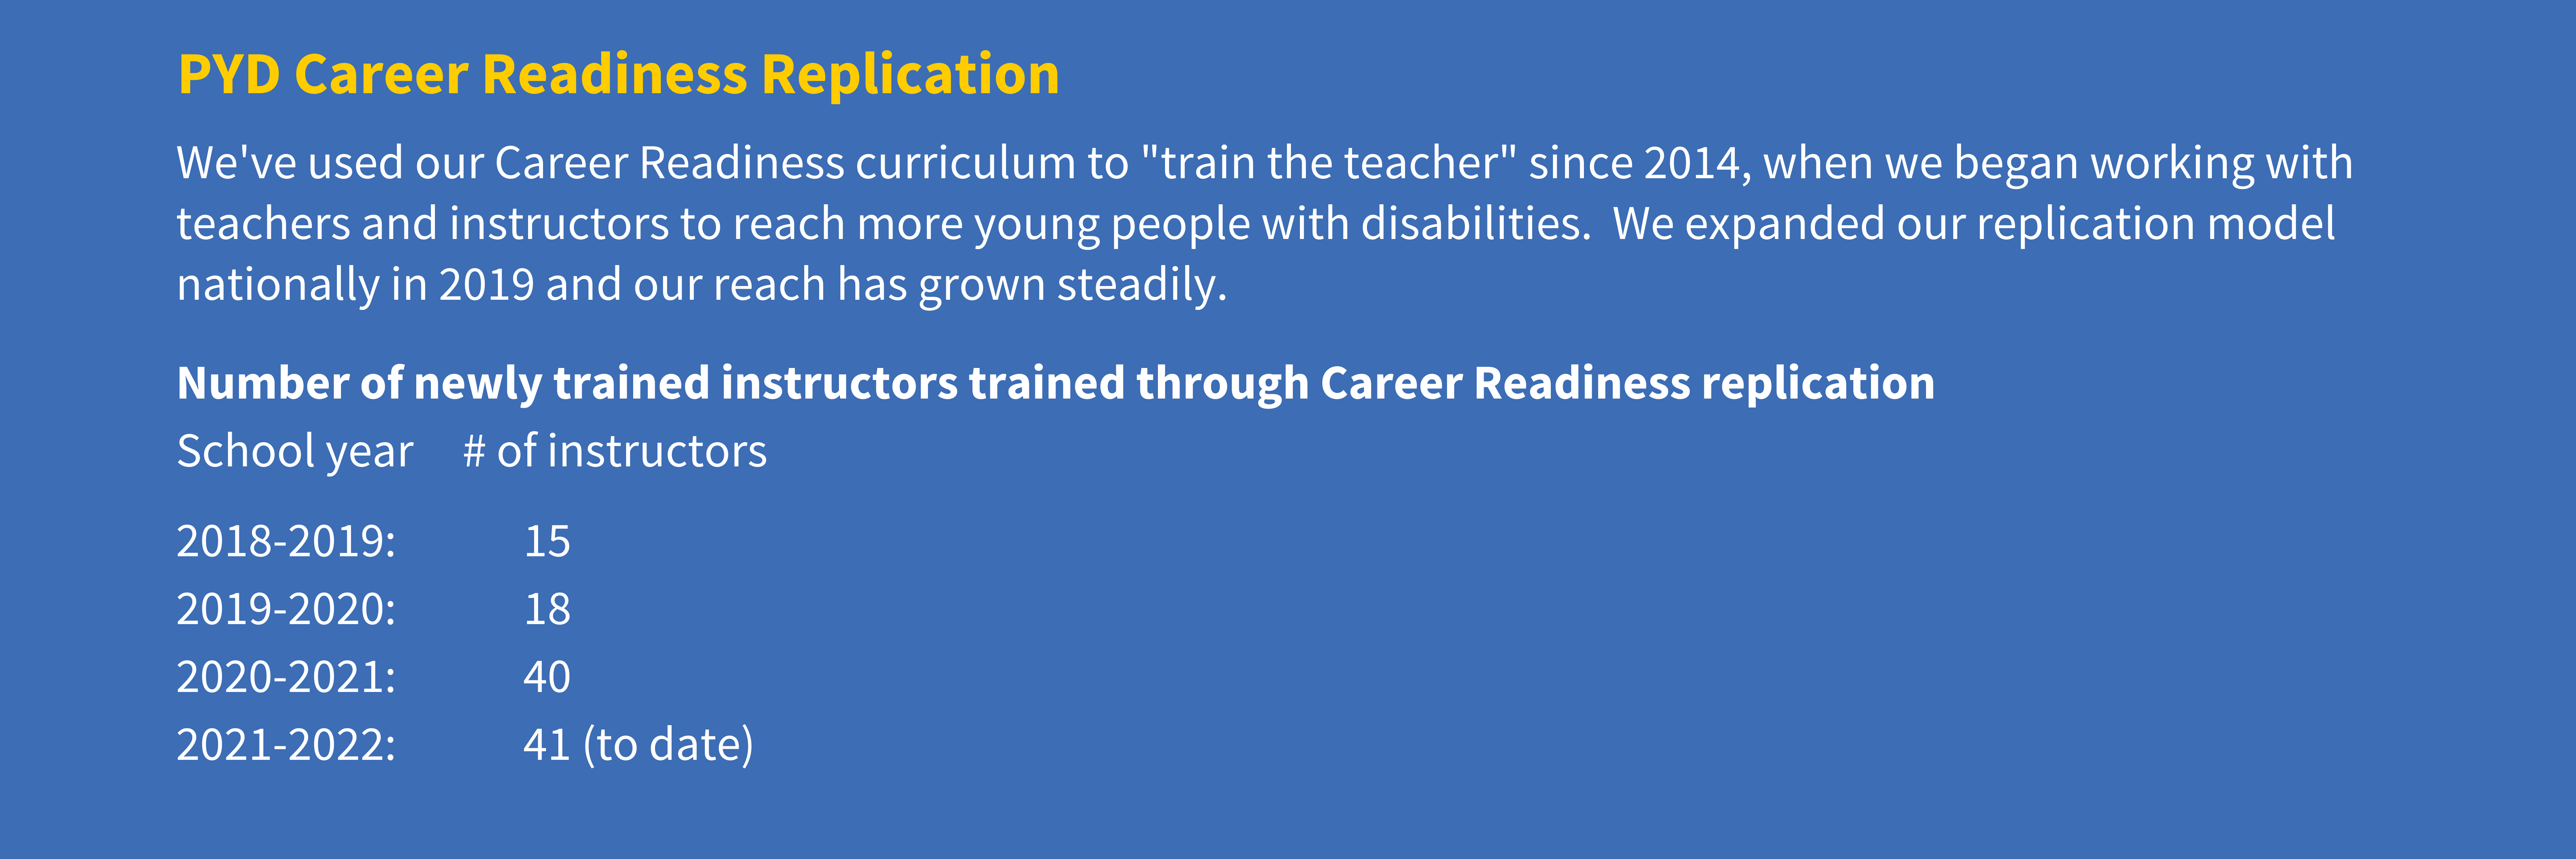 Chart showing the number of teachers using the Career Readiness curriculum by year. In 2018, it was 15 teachers. In 2019, 18 teachers. In 2020, 40 teachers. And in 2021, 41 teachers to date.